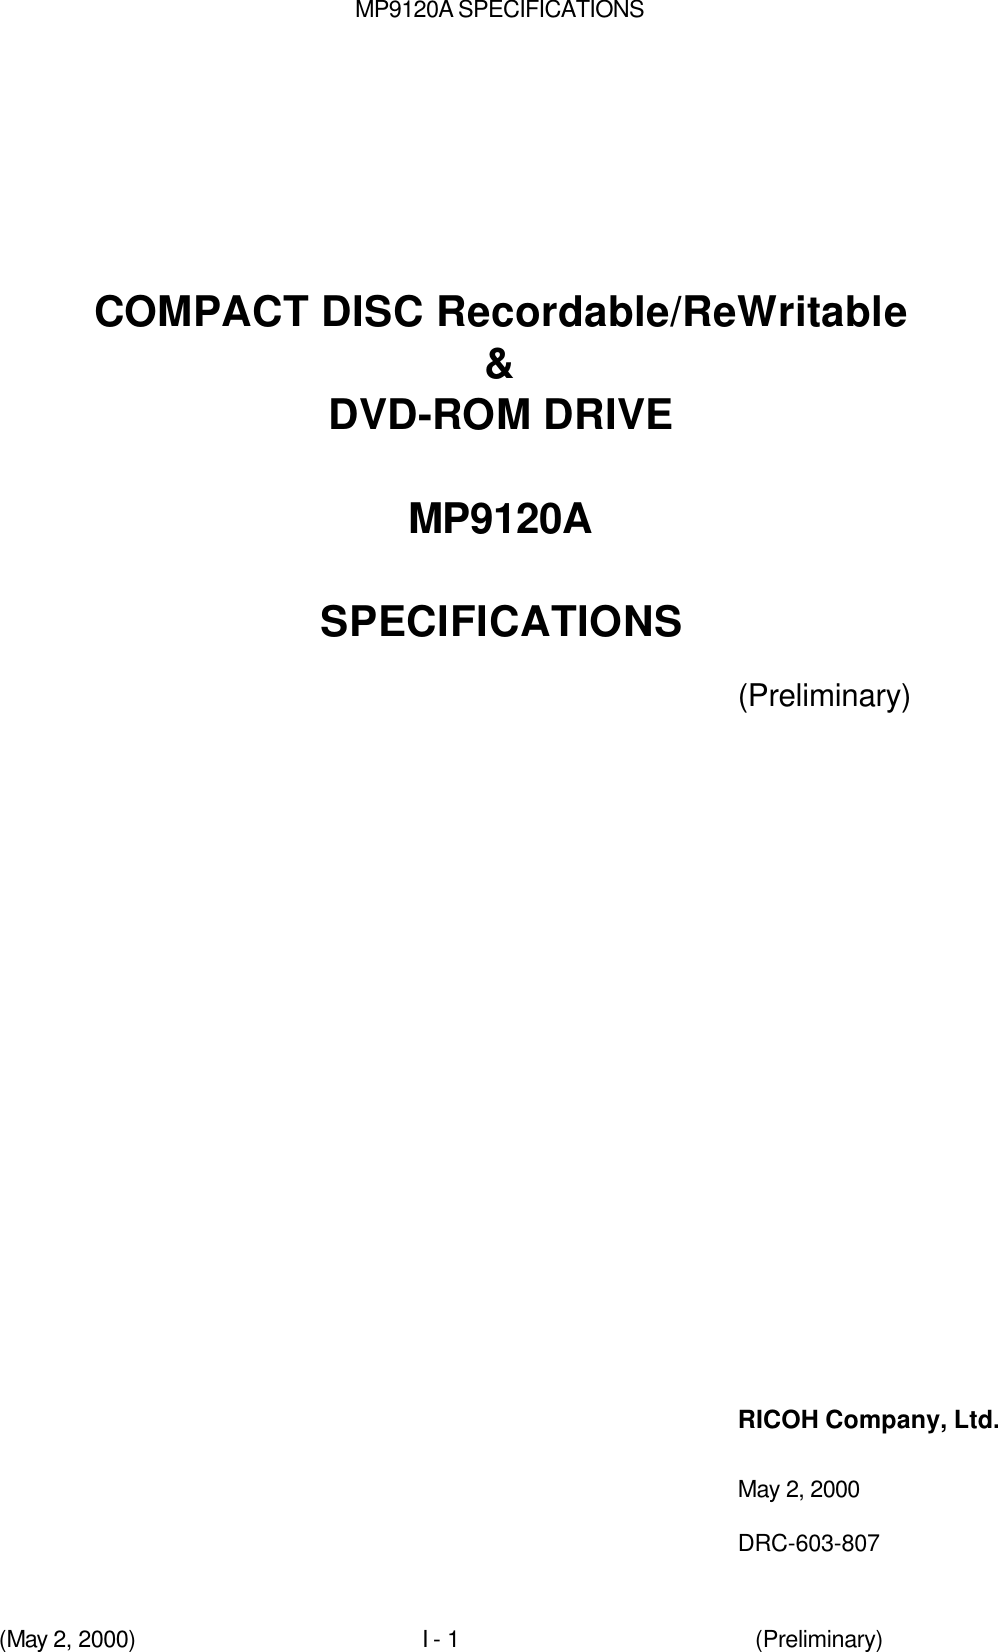 MP9120A SPECIFICATIONS(May 2, 2000)I - 1 (Preliminary)COMPACT DISC Recordable/ReWritable&amp;DVD-ROM DRIVEMP9120ASPECIFICATIONS (Preliminary)RICOH Company, Ltd.May 2, 2000DRC-603-807